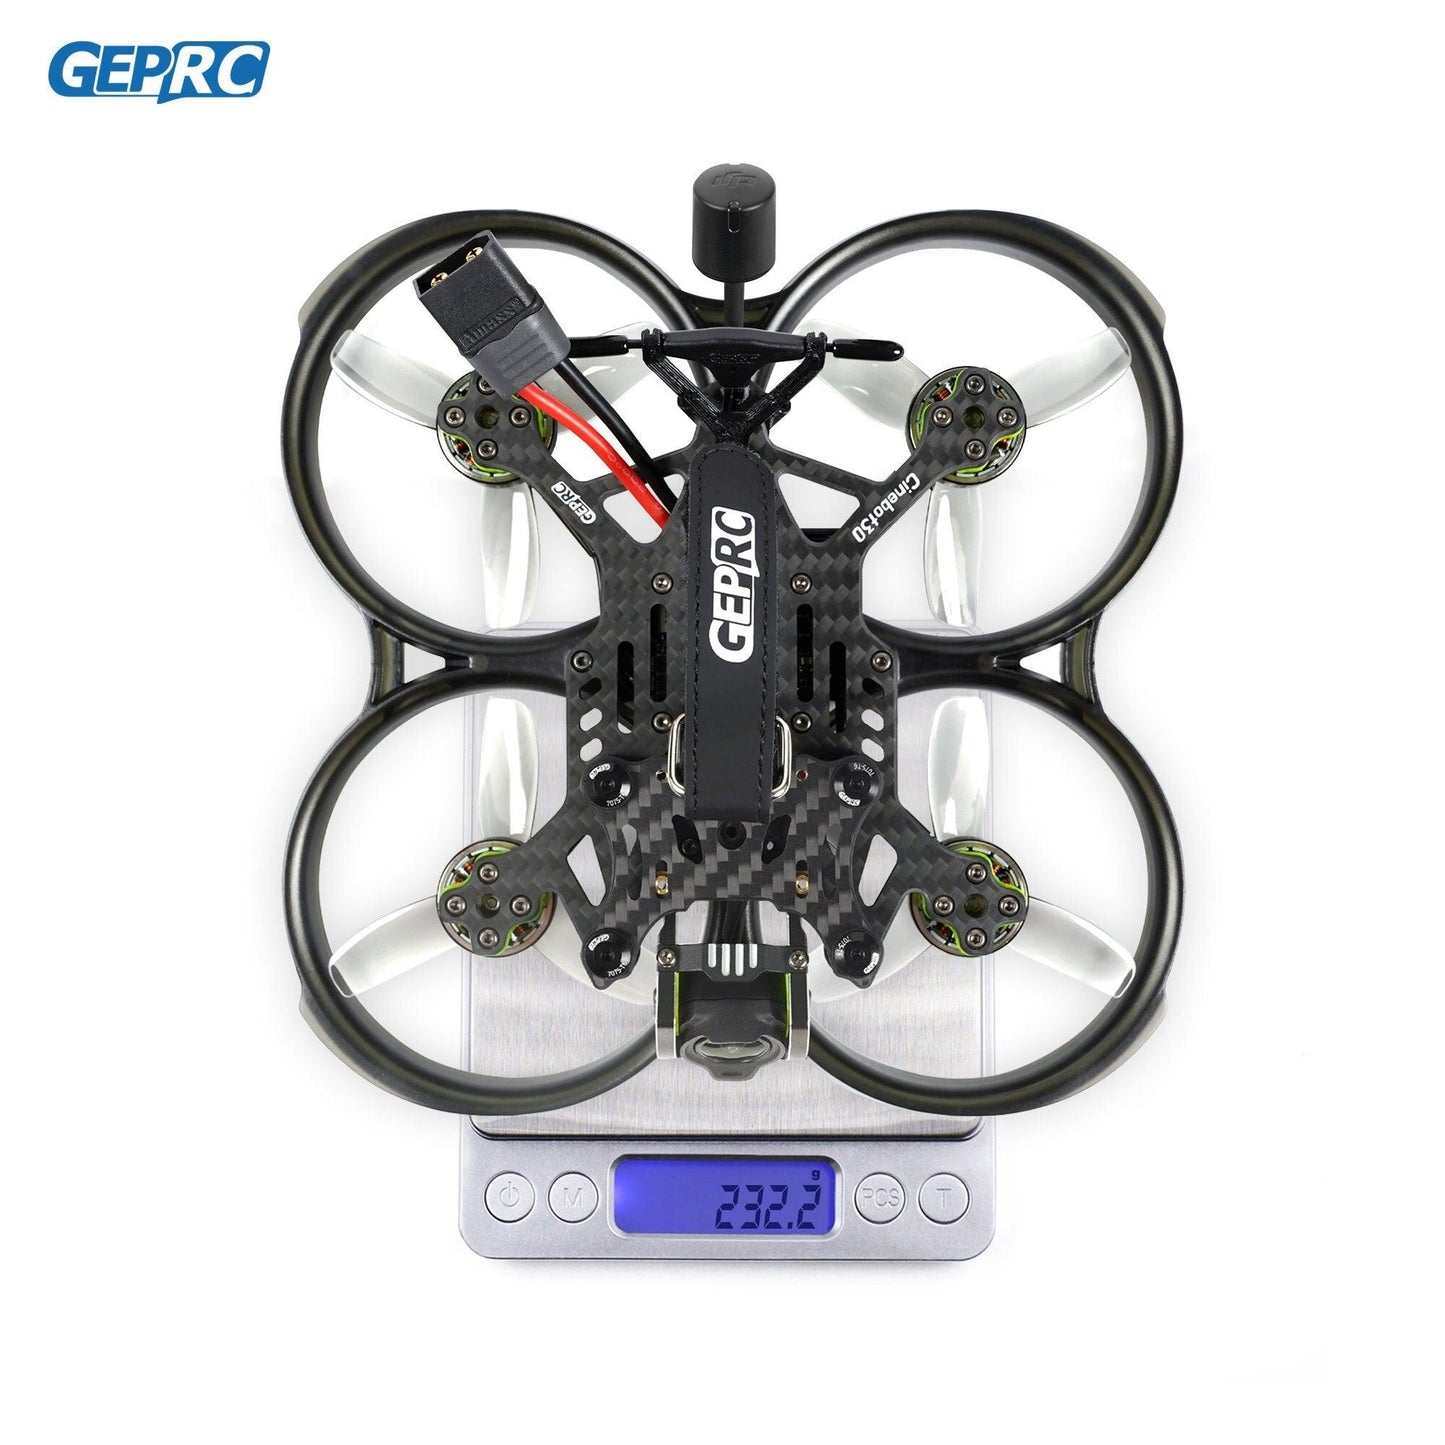 GEPRC Cinebot30 FPV Drone HD O3 System 6S 2450KV VTX O3 Air Unit 4K 60fps Video 155 Wide-angle RC FPV Quadcopter Freestyle Drone - RCDrone